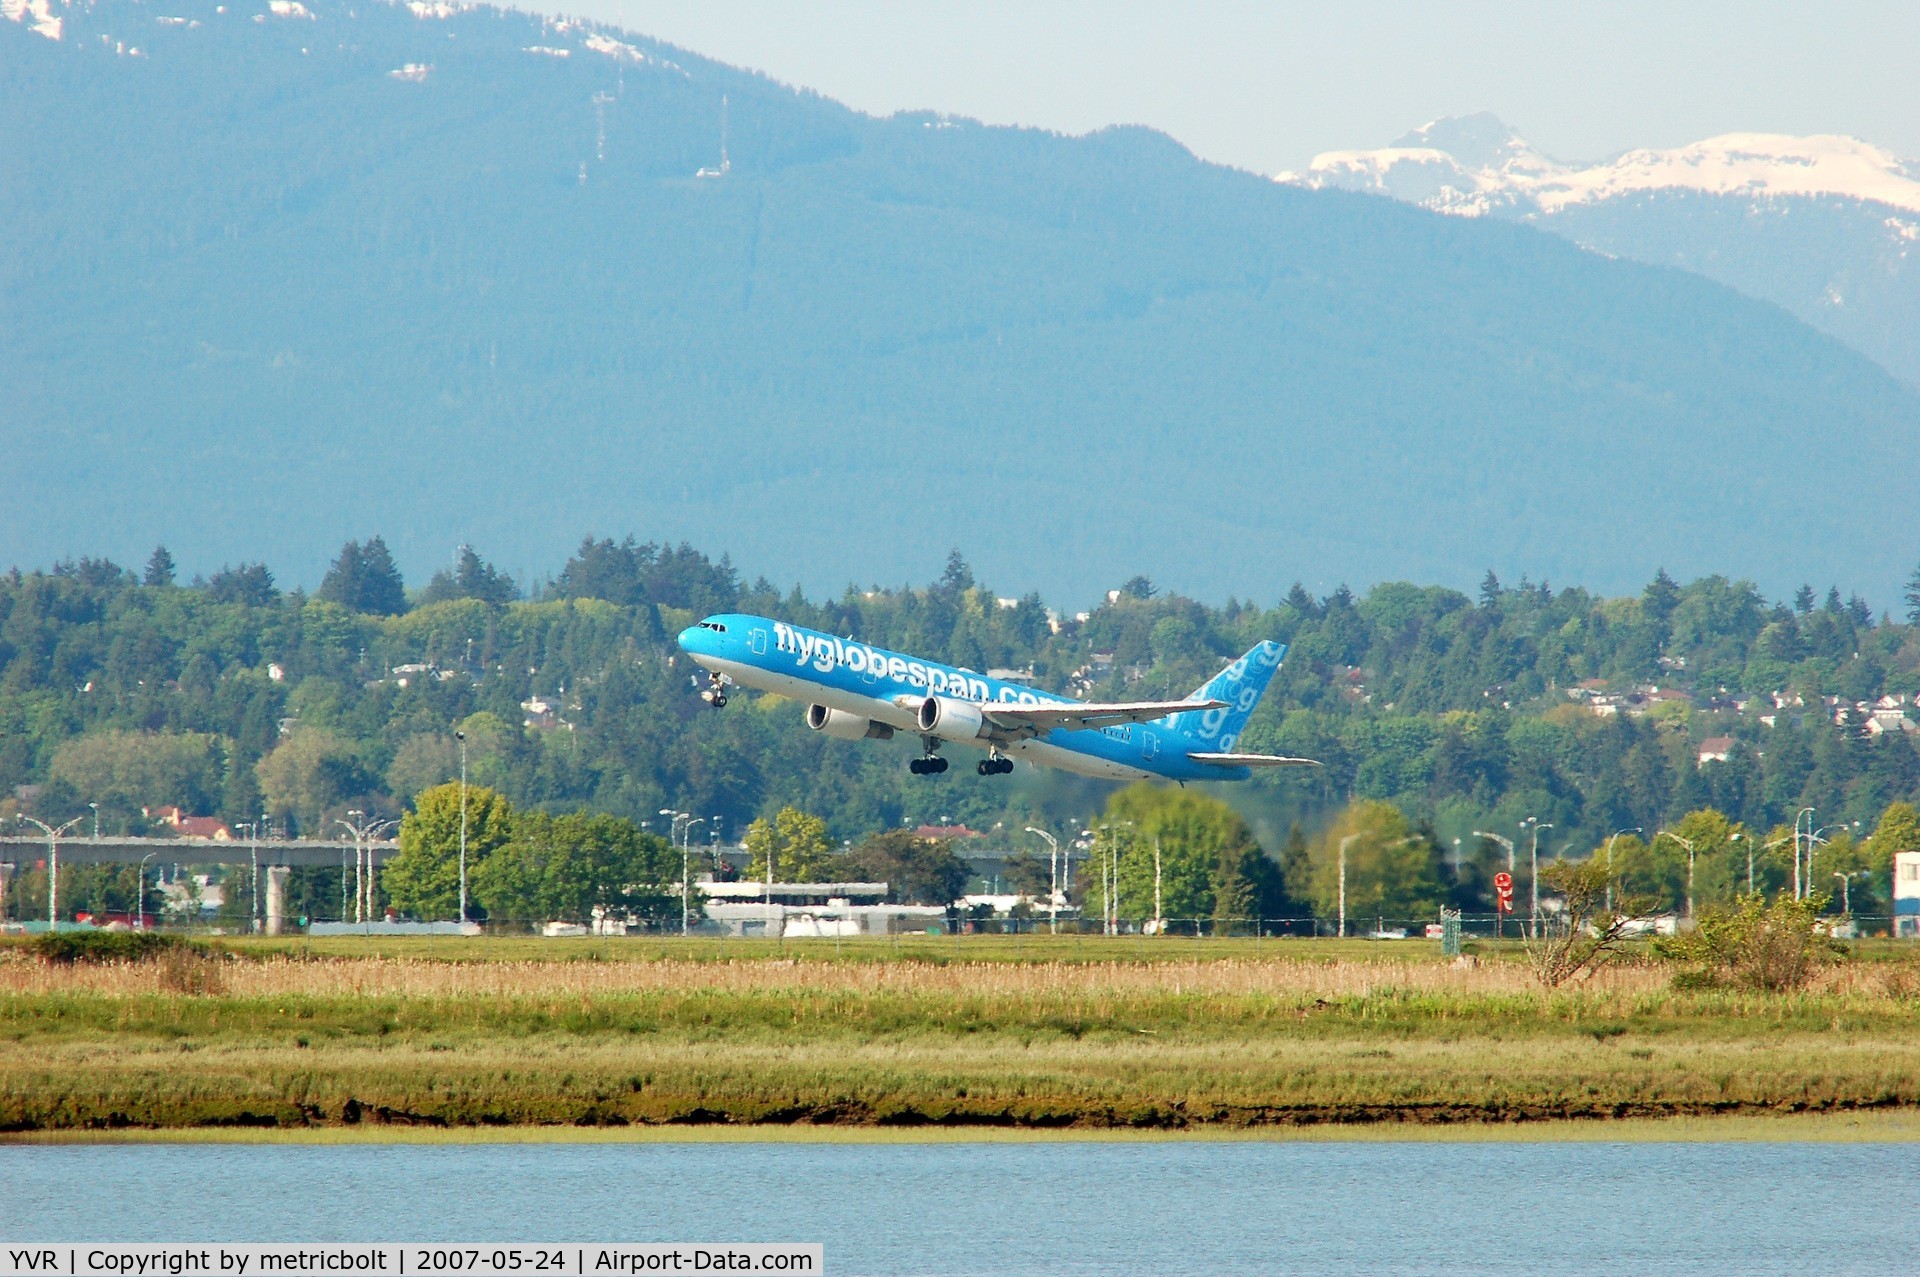 Vancouver International Airport, Vancouver, British Columbia Canada (YVR) - departure for Glasgow